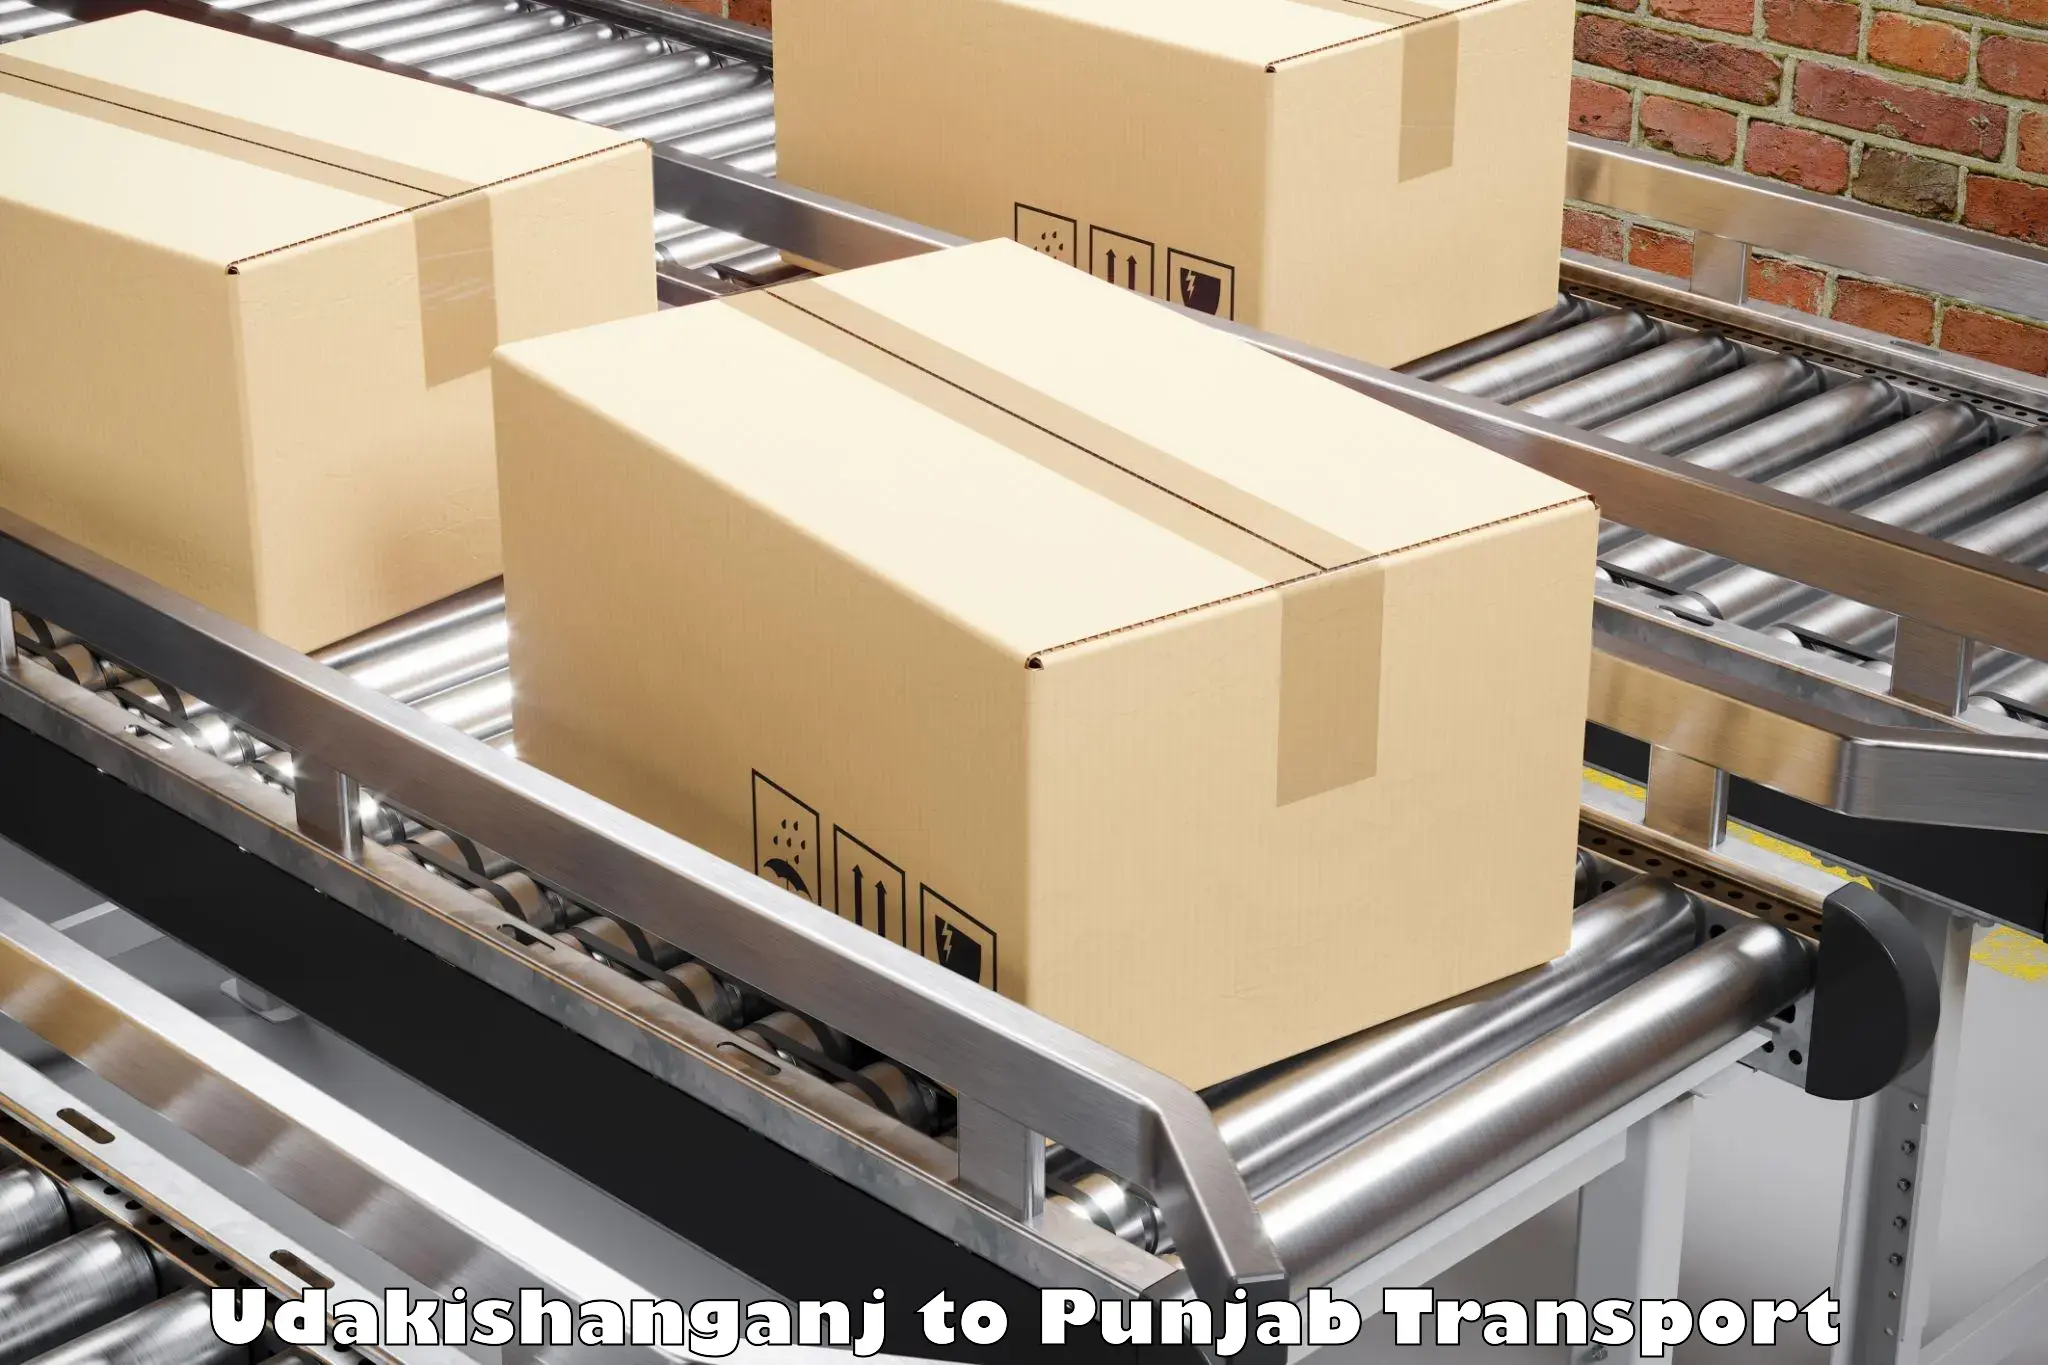 Air freight transport services Udakishanganj to Begowal